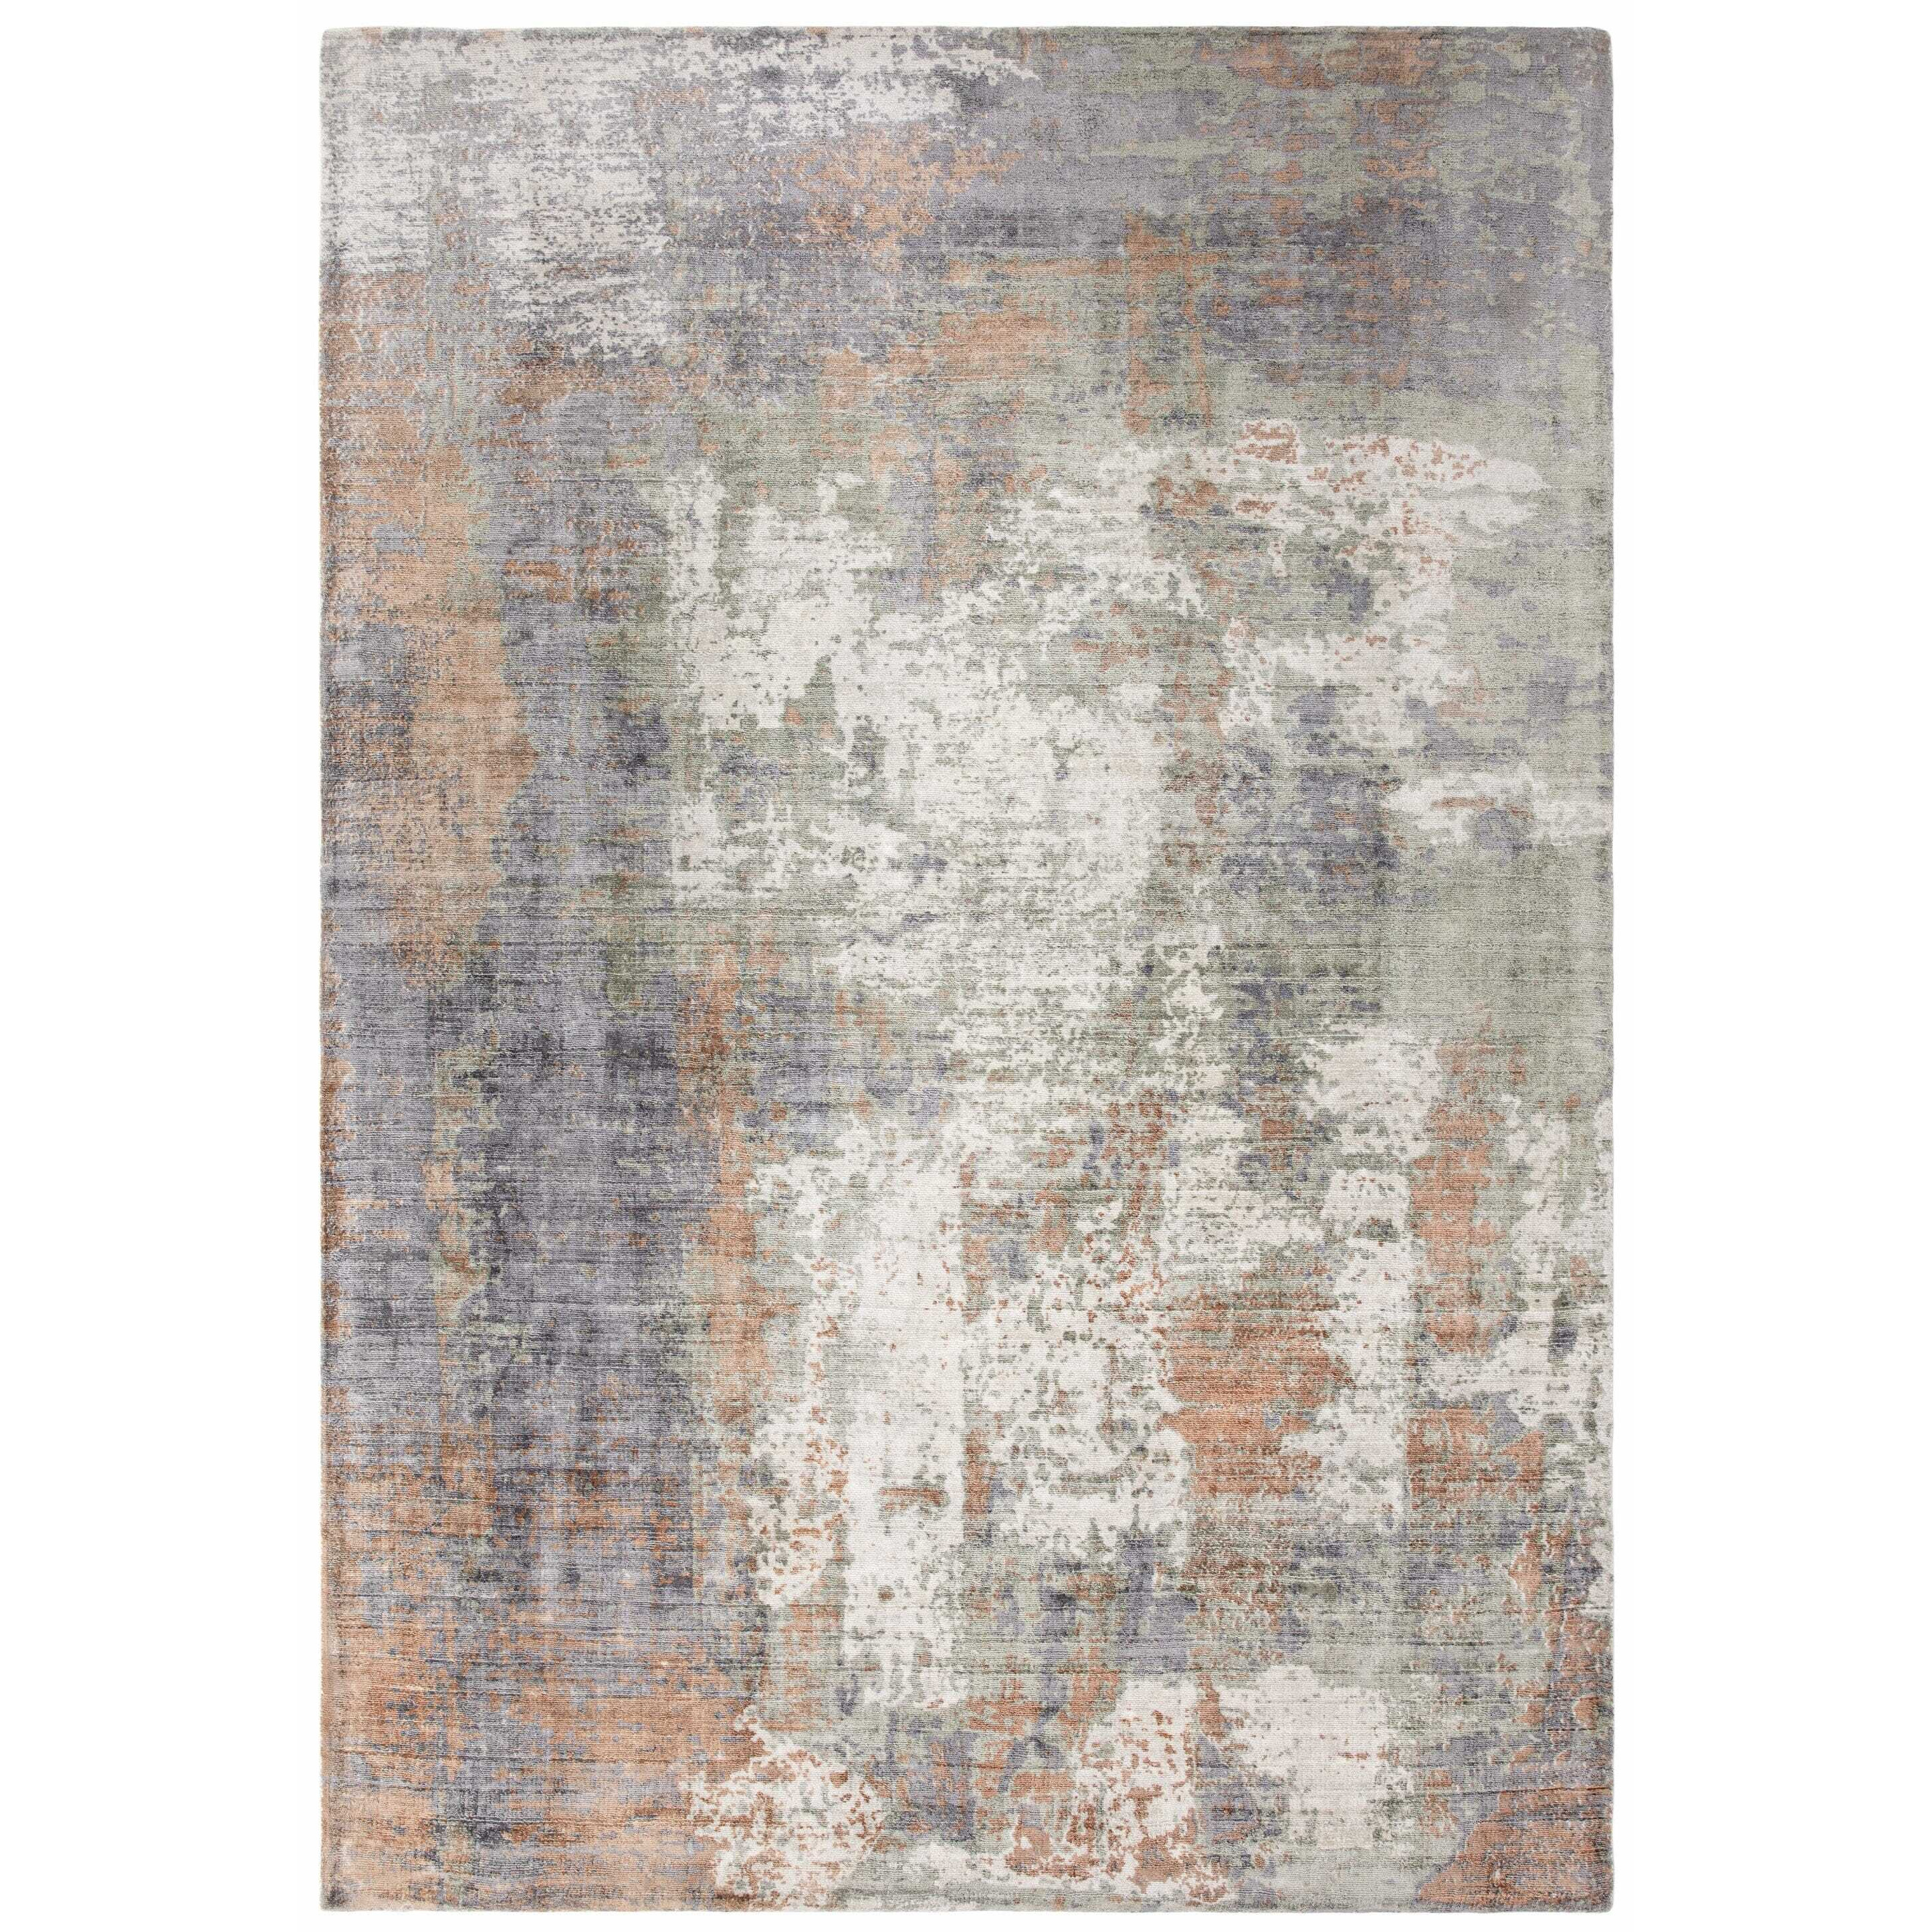 Asiatic Carpets Gatsby Hand Woven Rug Coral - 160 x 230cm - image 1